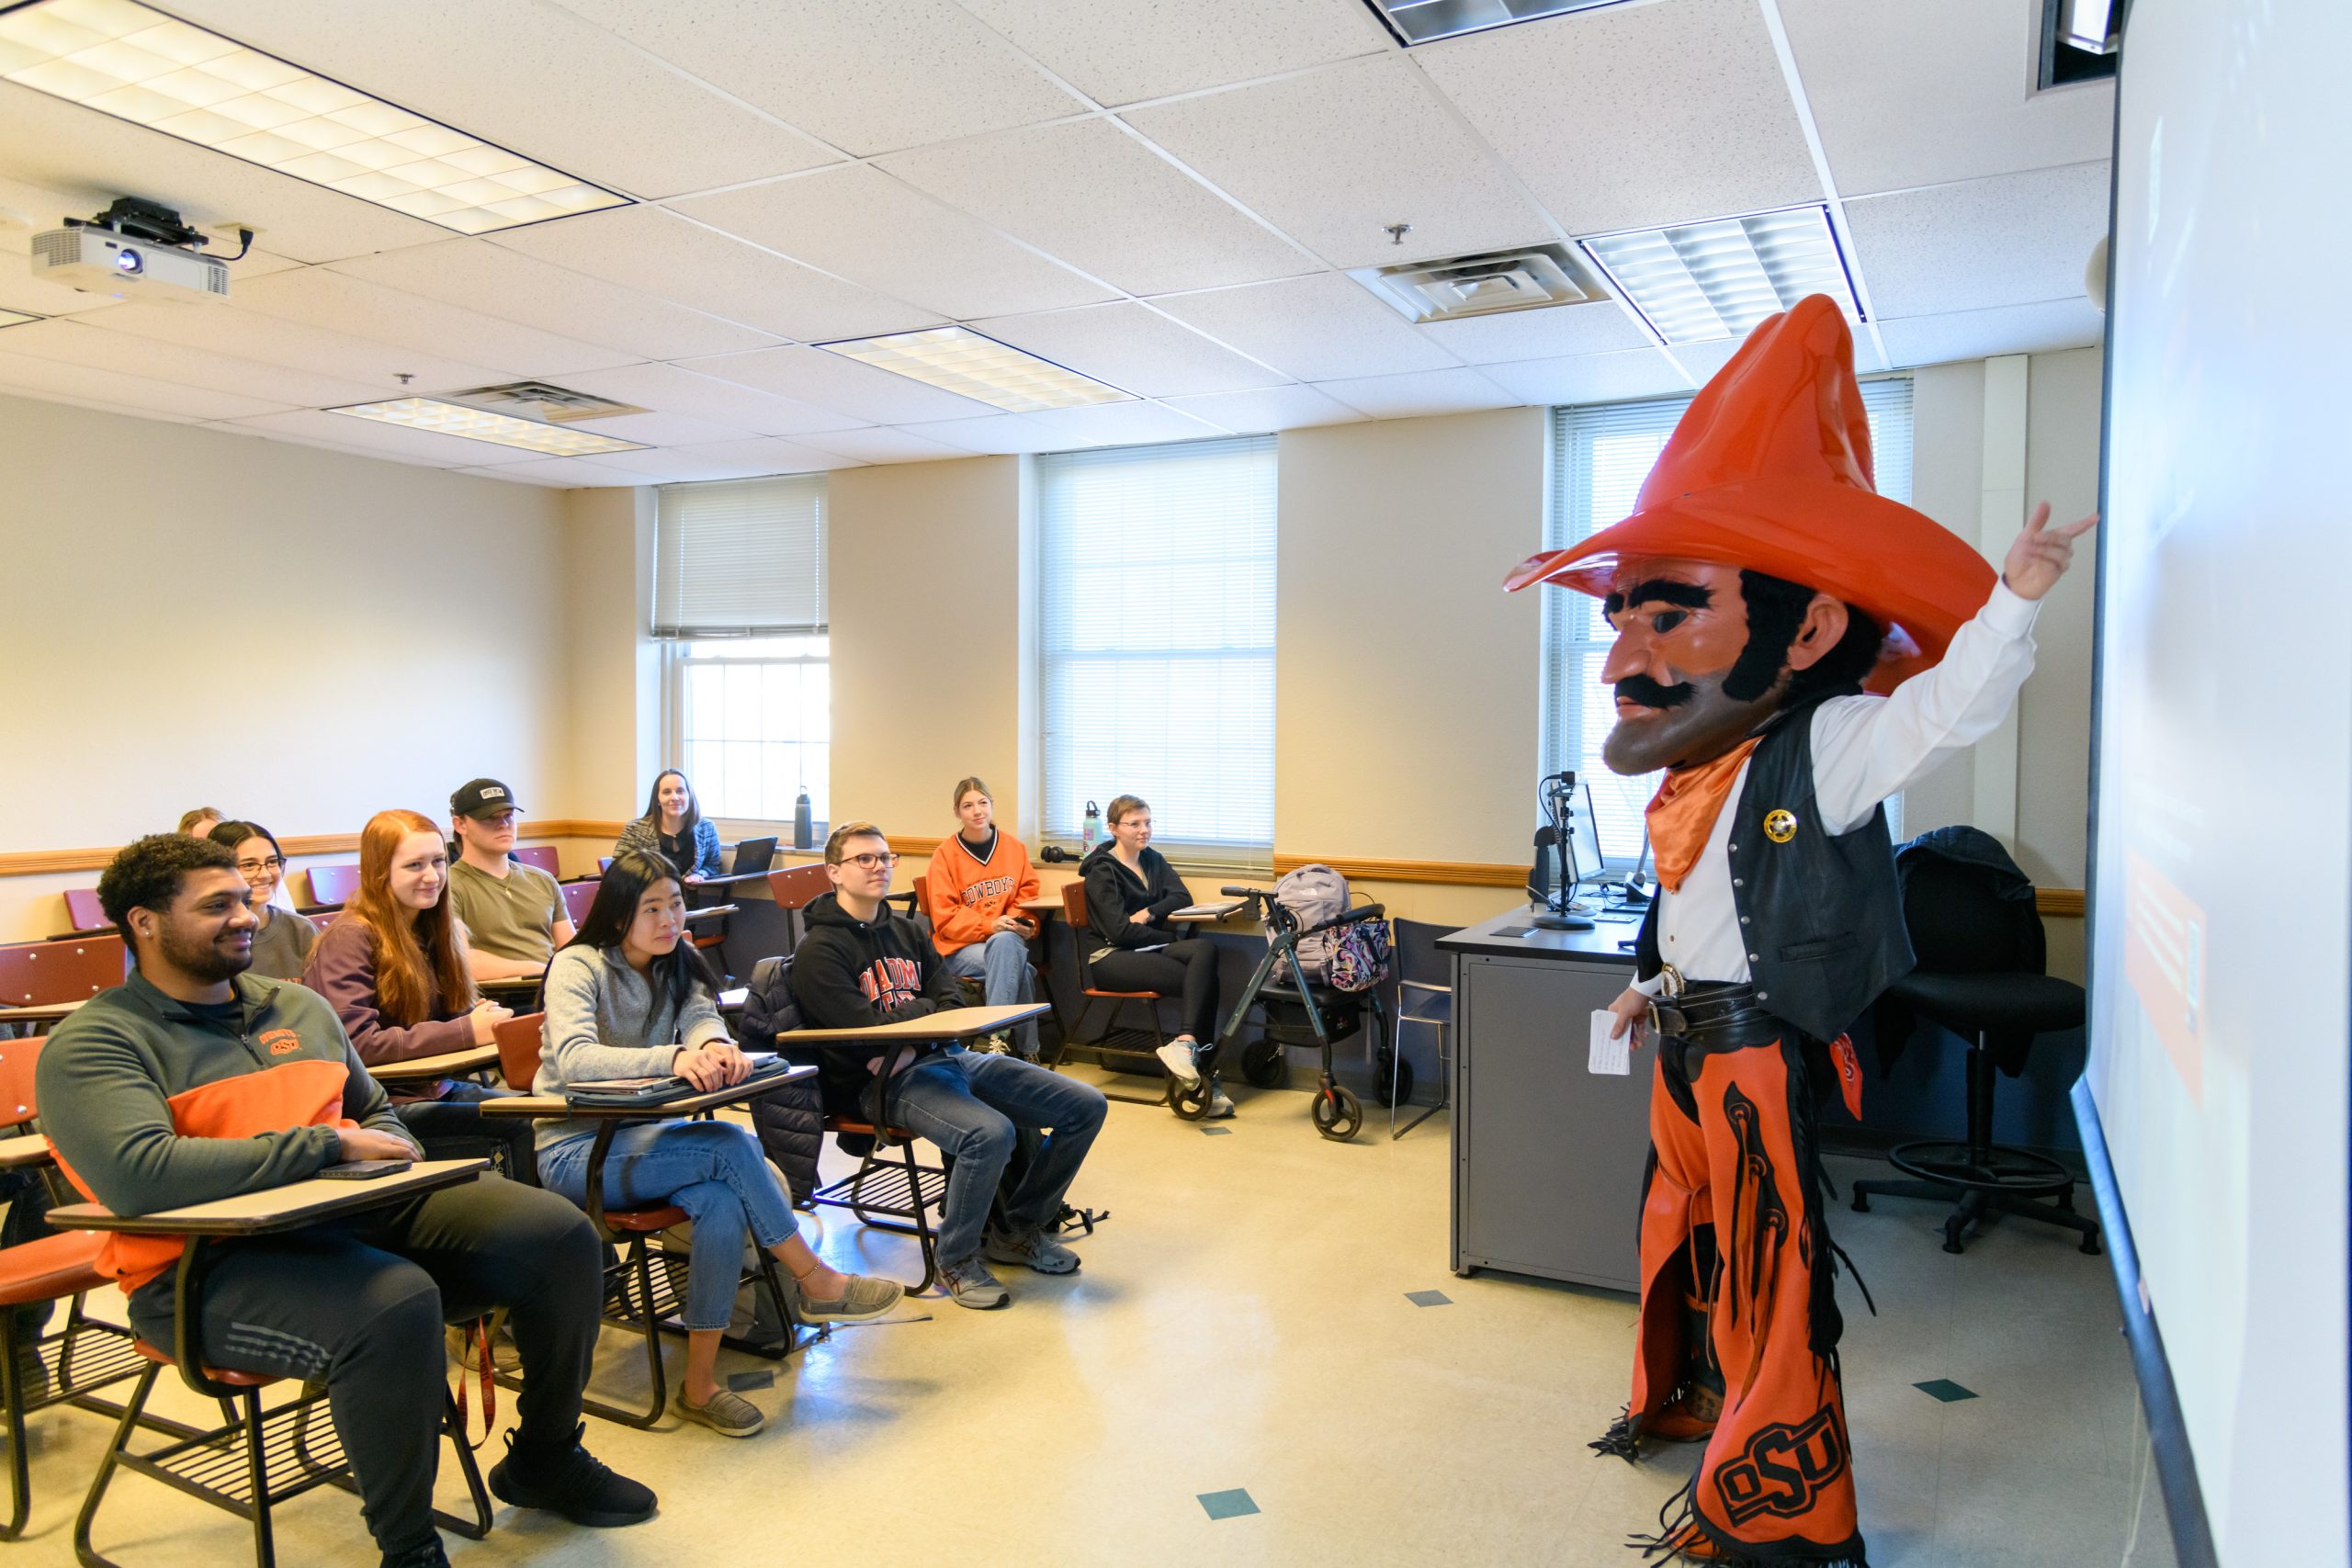 Pistol Pete giving a speech in front of a group of students in the classroom.